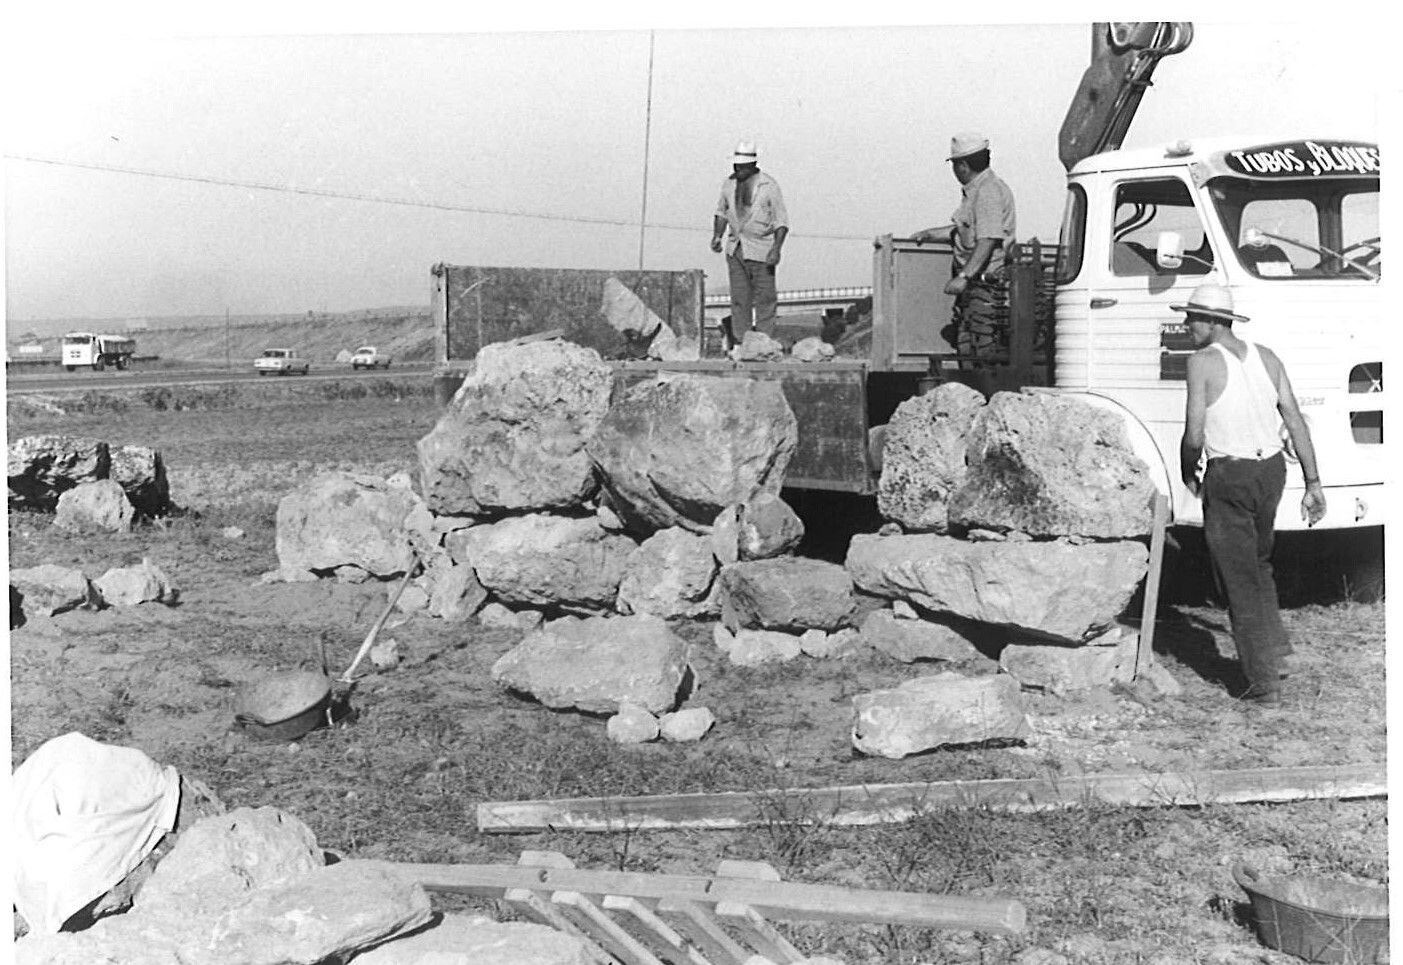 Workers load the stones of the Talaiotic sanctuary at Son Oms in the late 1960s.